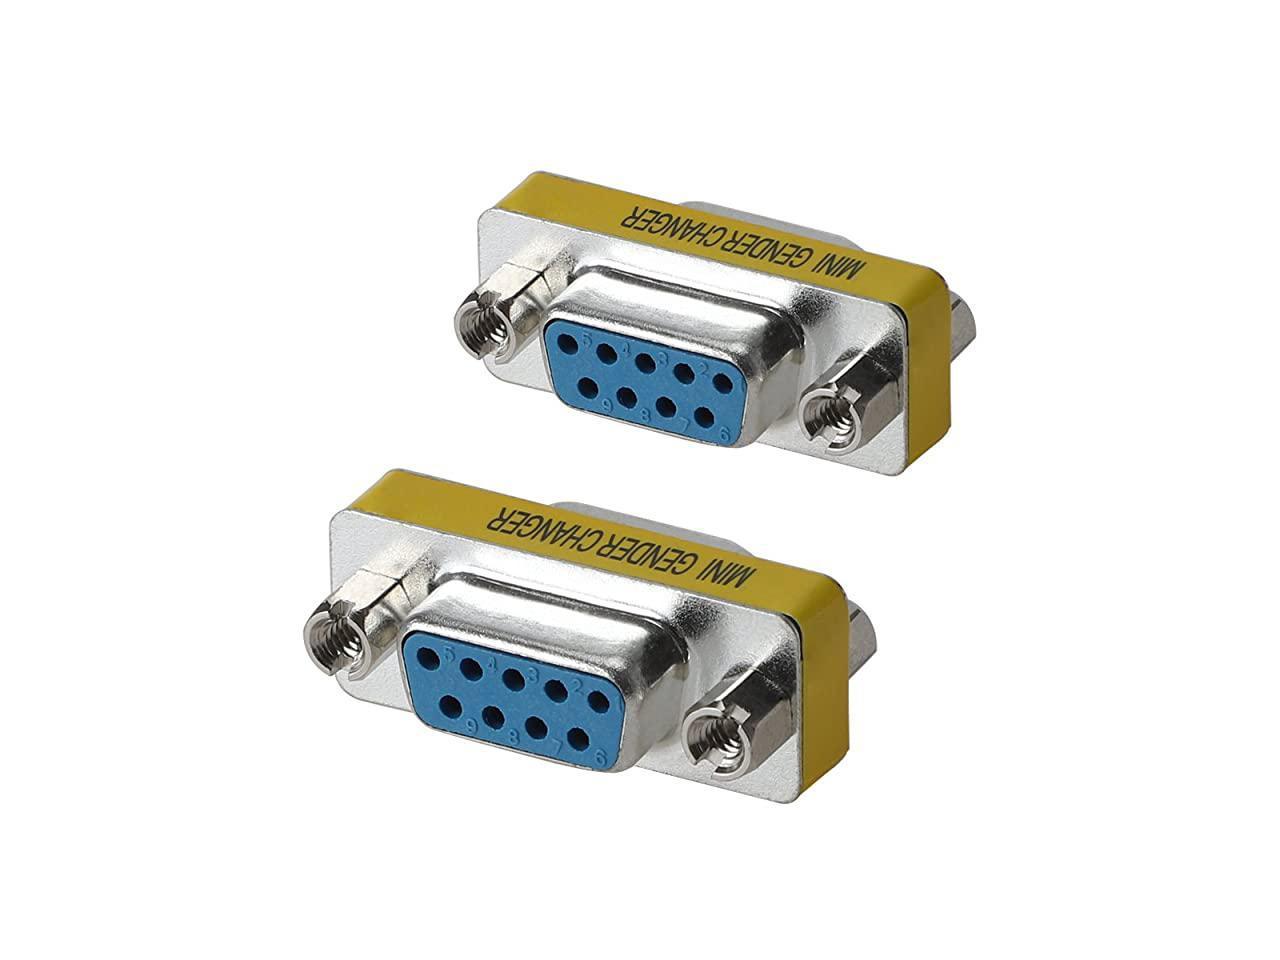 RS232 Serial DB25 Female to Female Mini Gender Changer Coupler Adapter Connector 